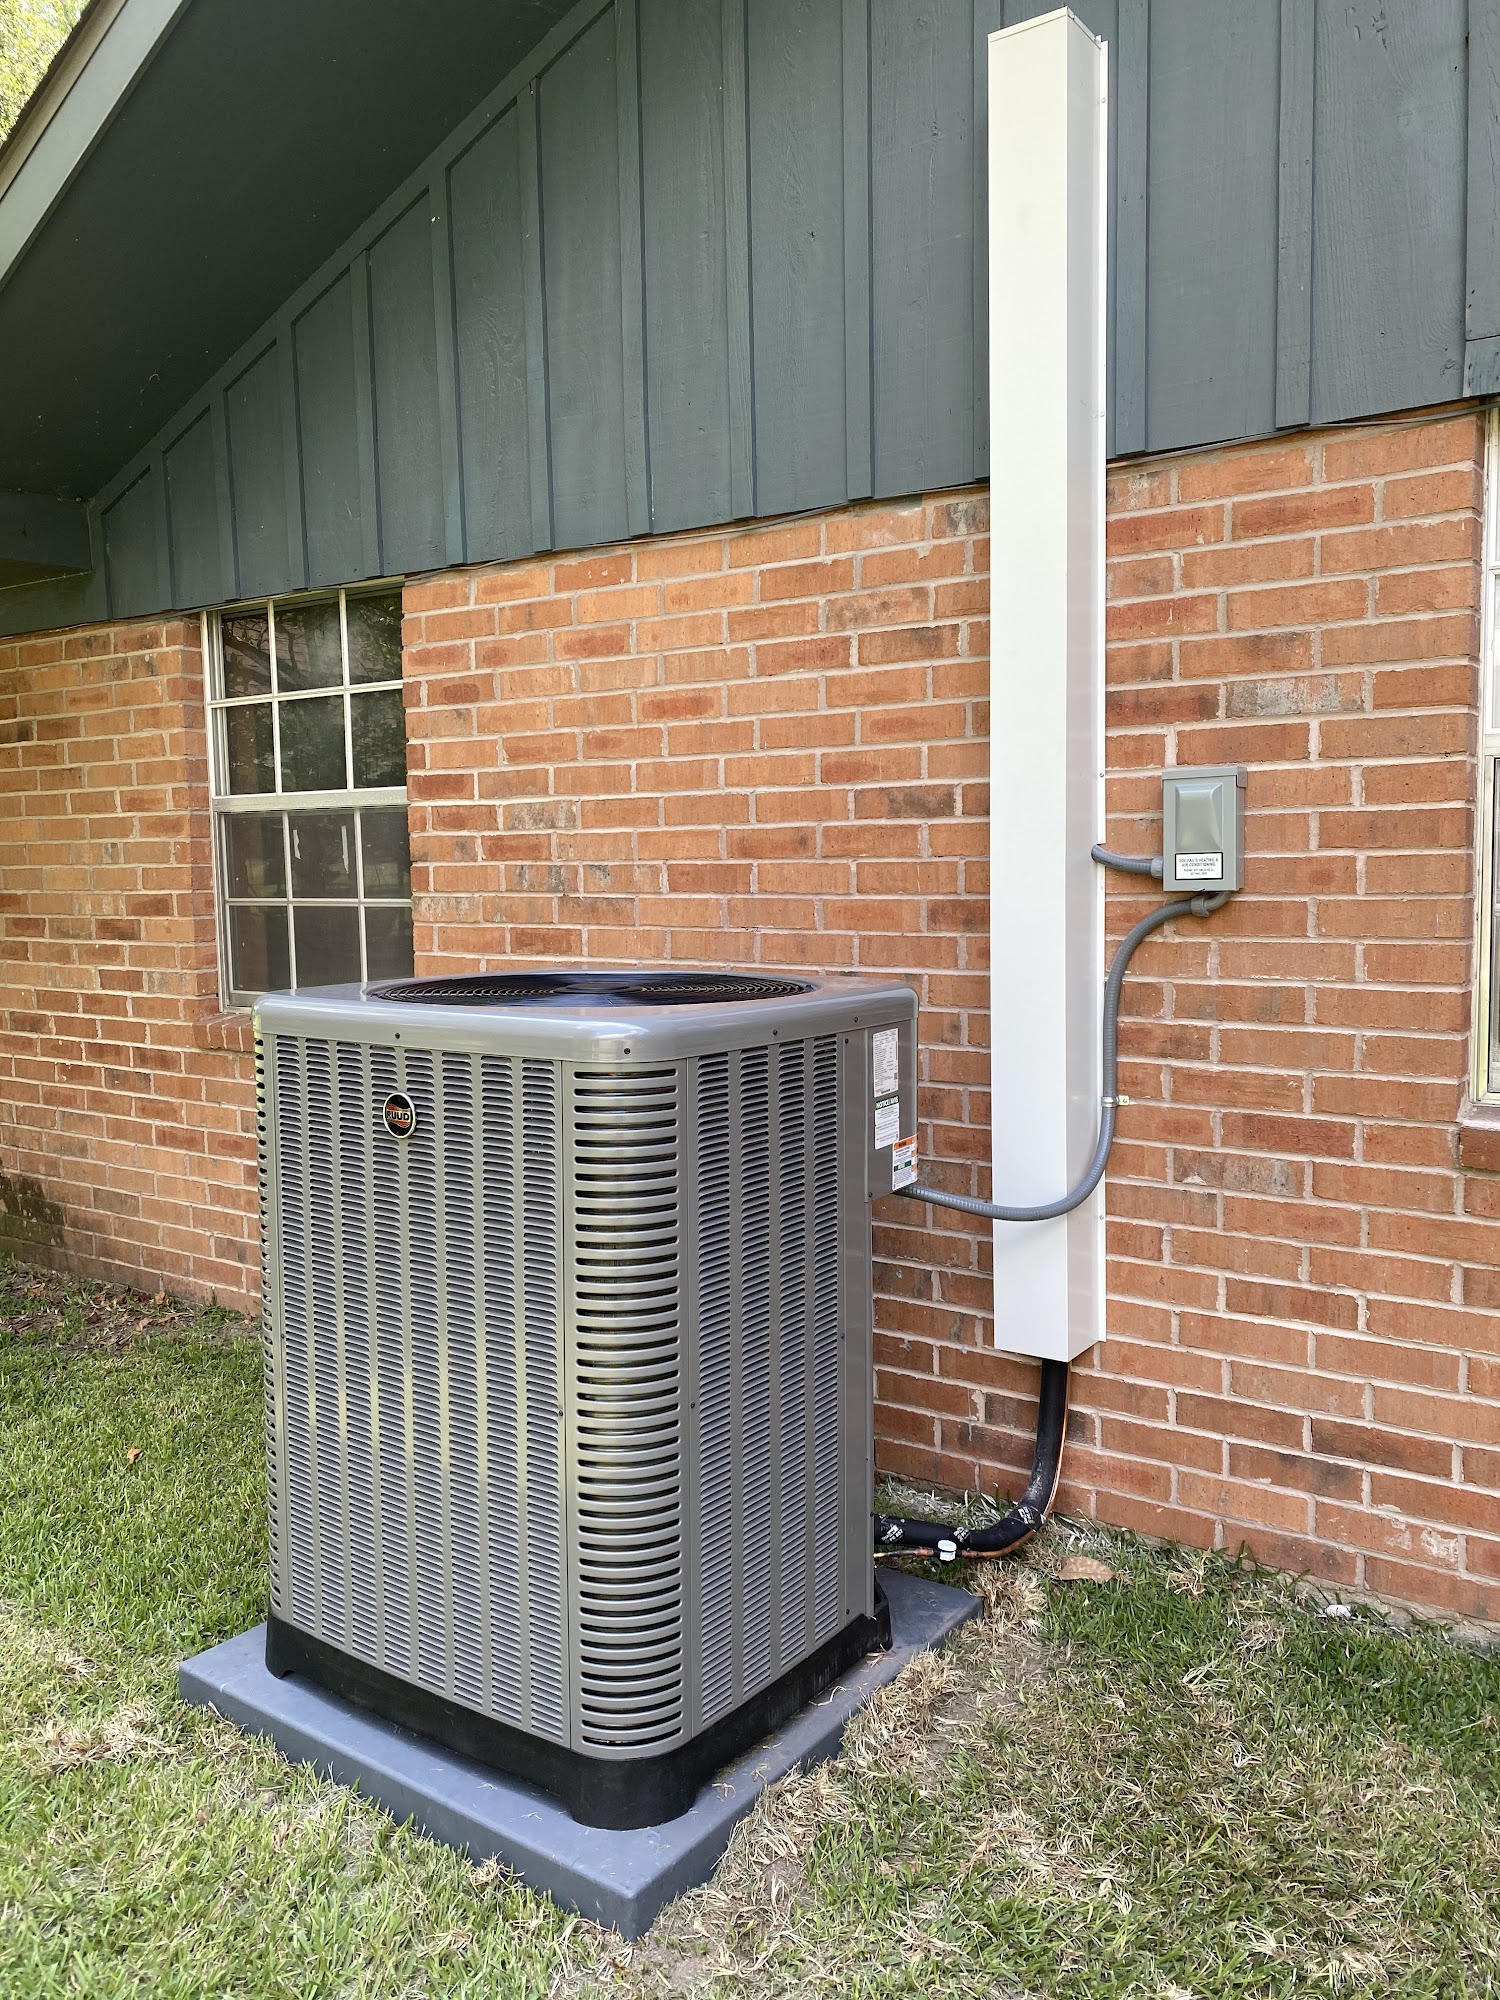 Soileau's Heating & Air Conditioning